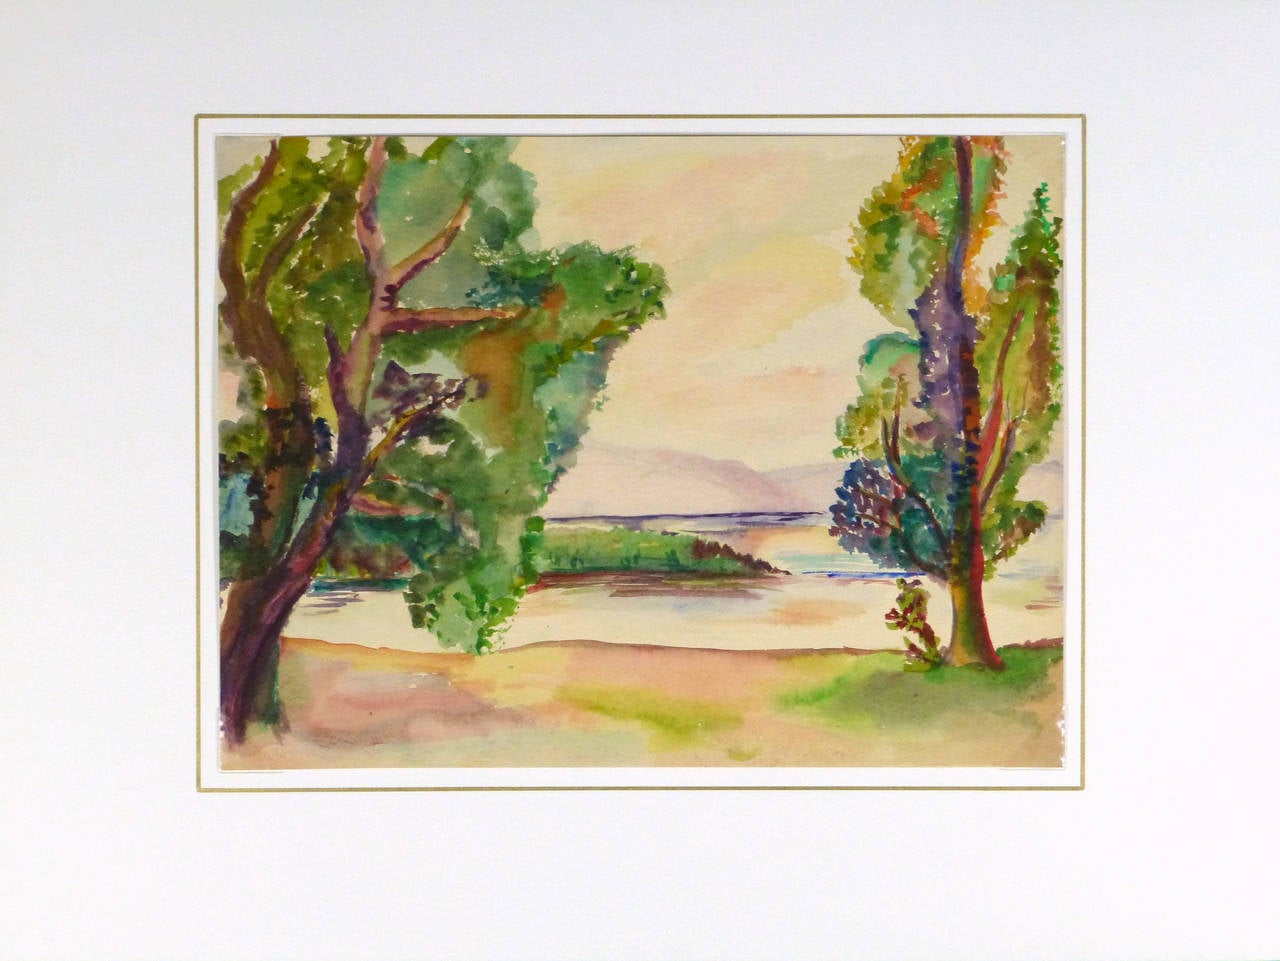 Luminous and colorful watercolor landscape painting of lush green trees framing a smooth and placid lake by artist Erika Schob, 1941.

Original one-of-a-kind artwork on paper displayed on a white mat with a gold border. Mat fits a standard-size